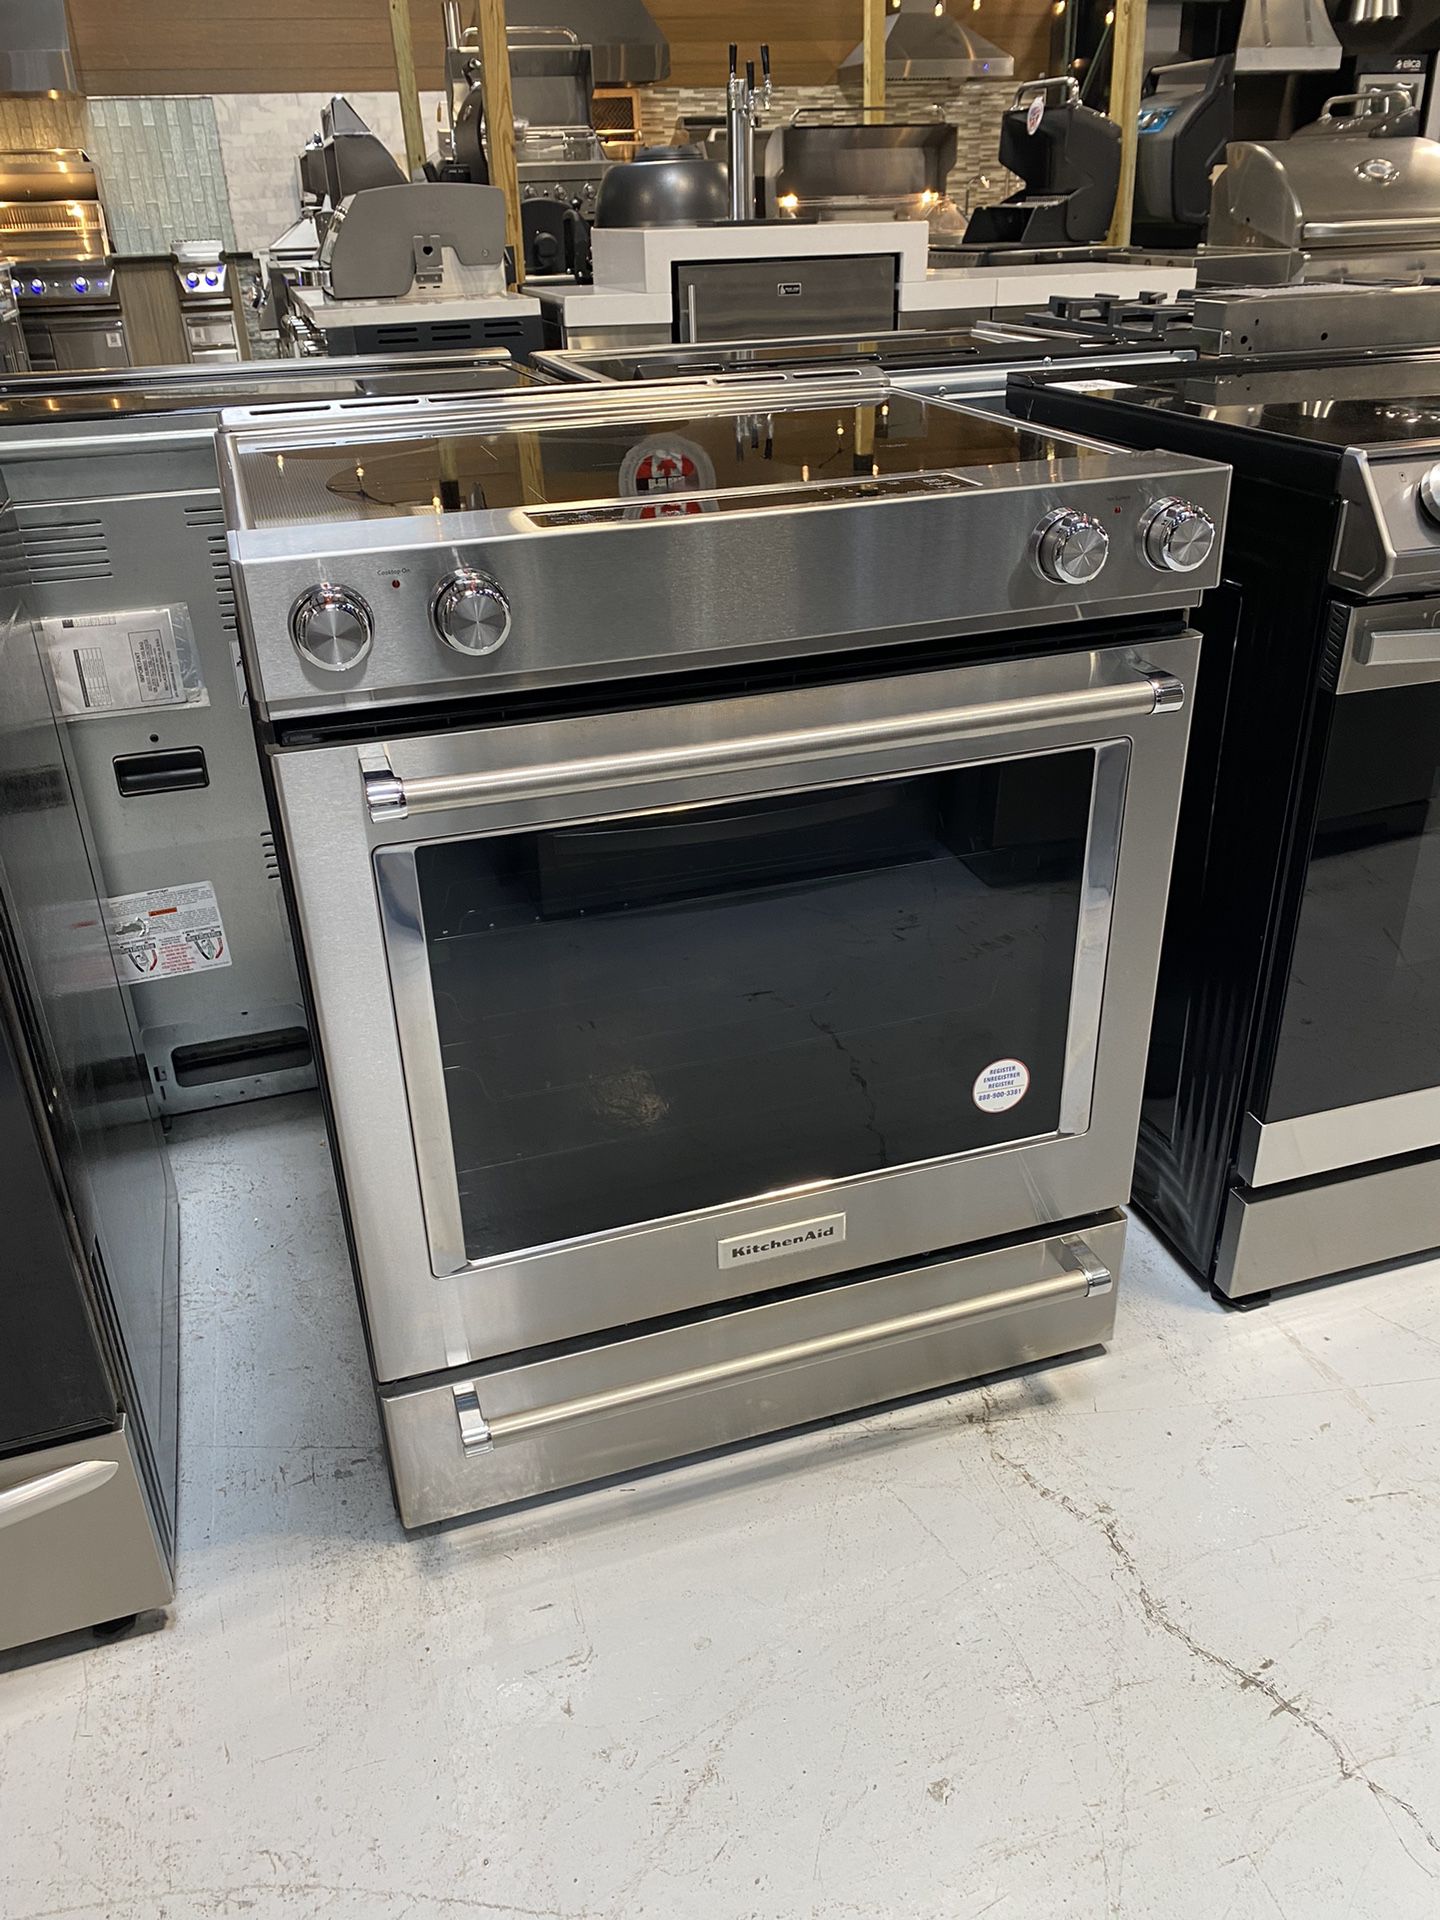 Stainless Steel 30” 5-Element Electric Convection Slide-In Range